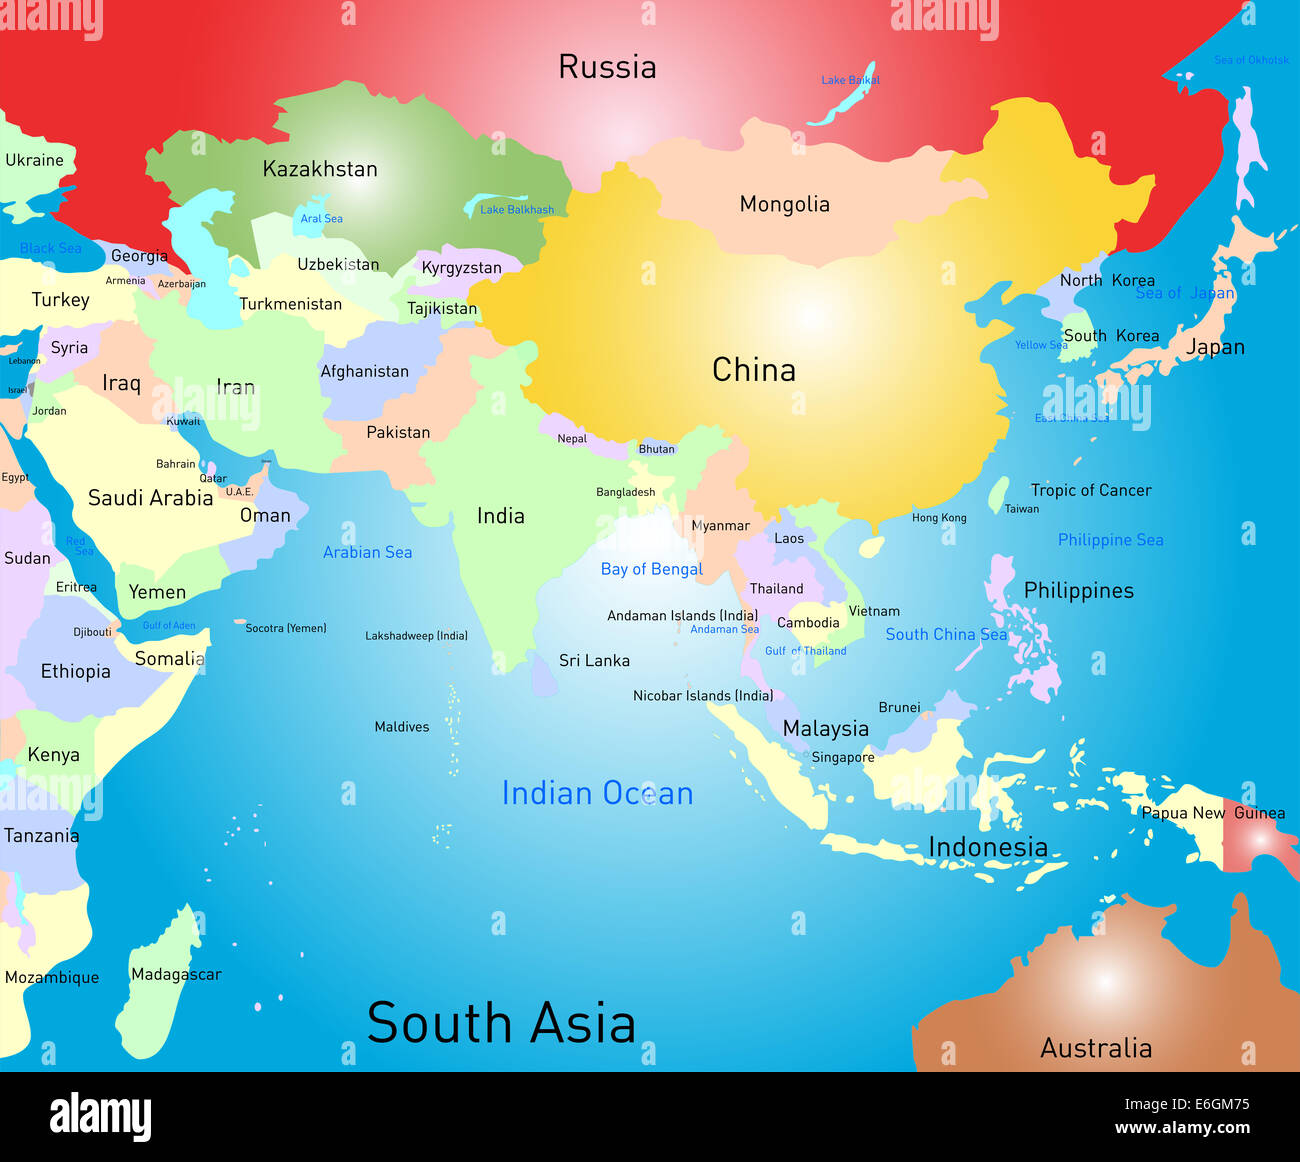 south asia map Stock Photo